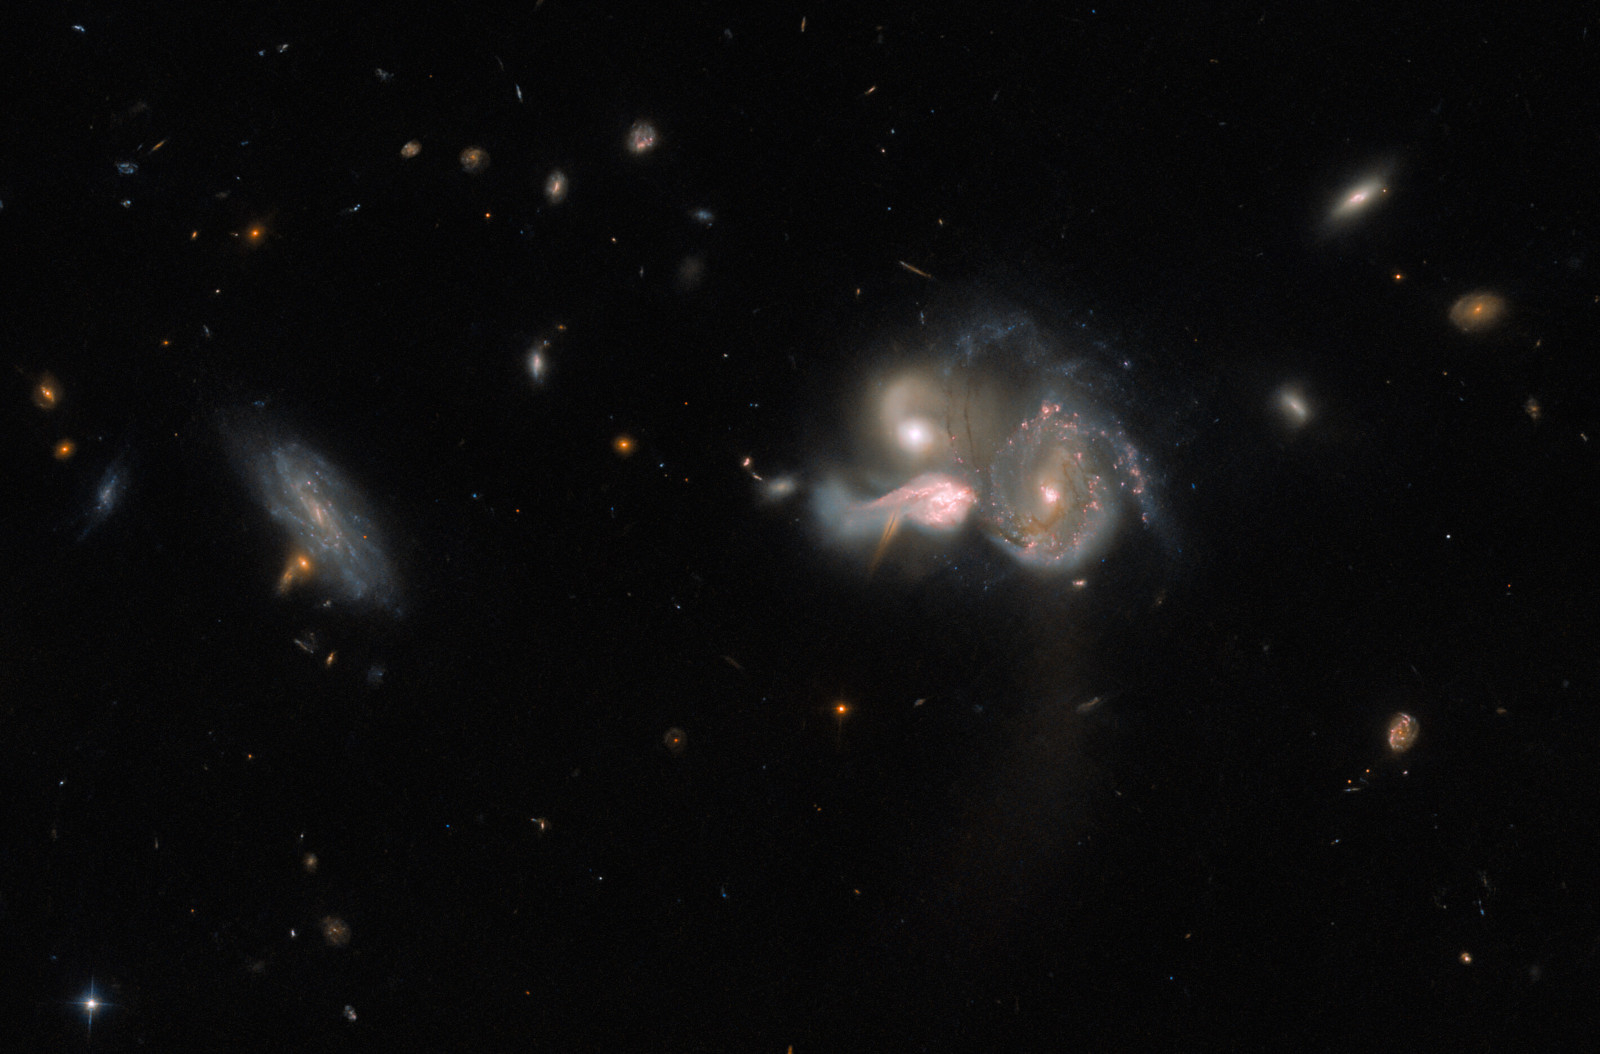 Hubble shows a photo of three massive galaxies merging into one